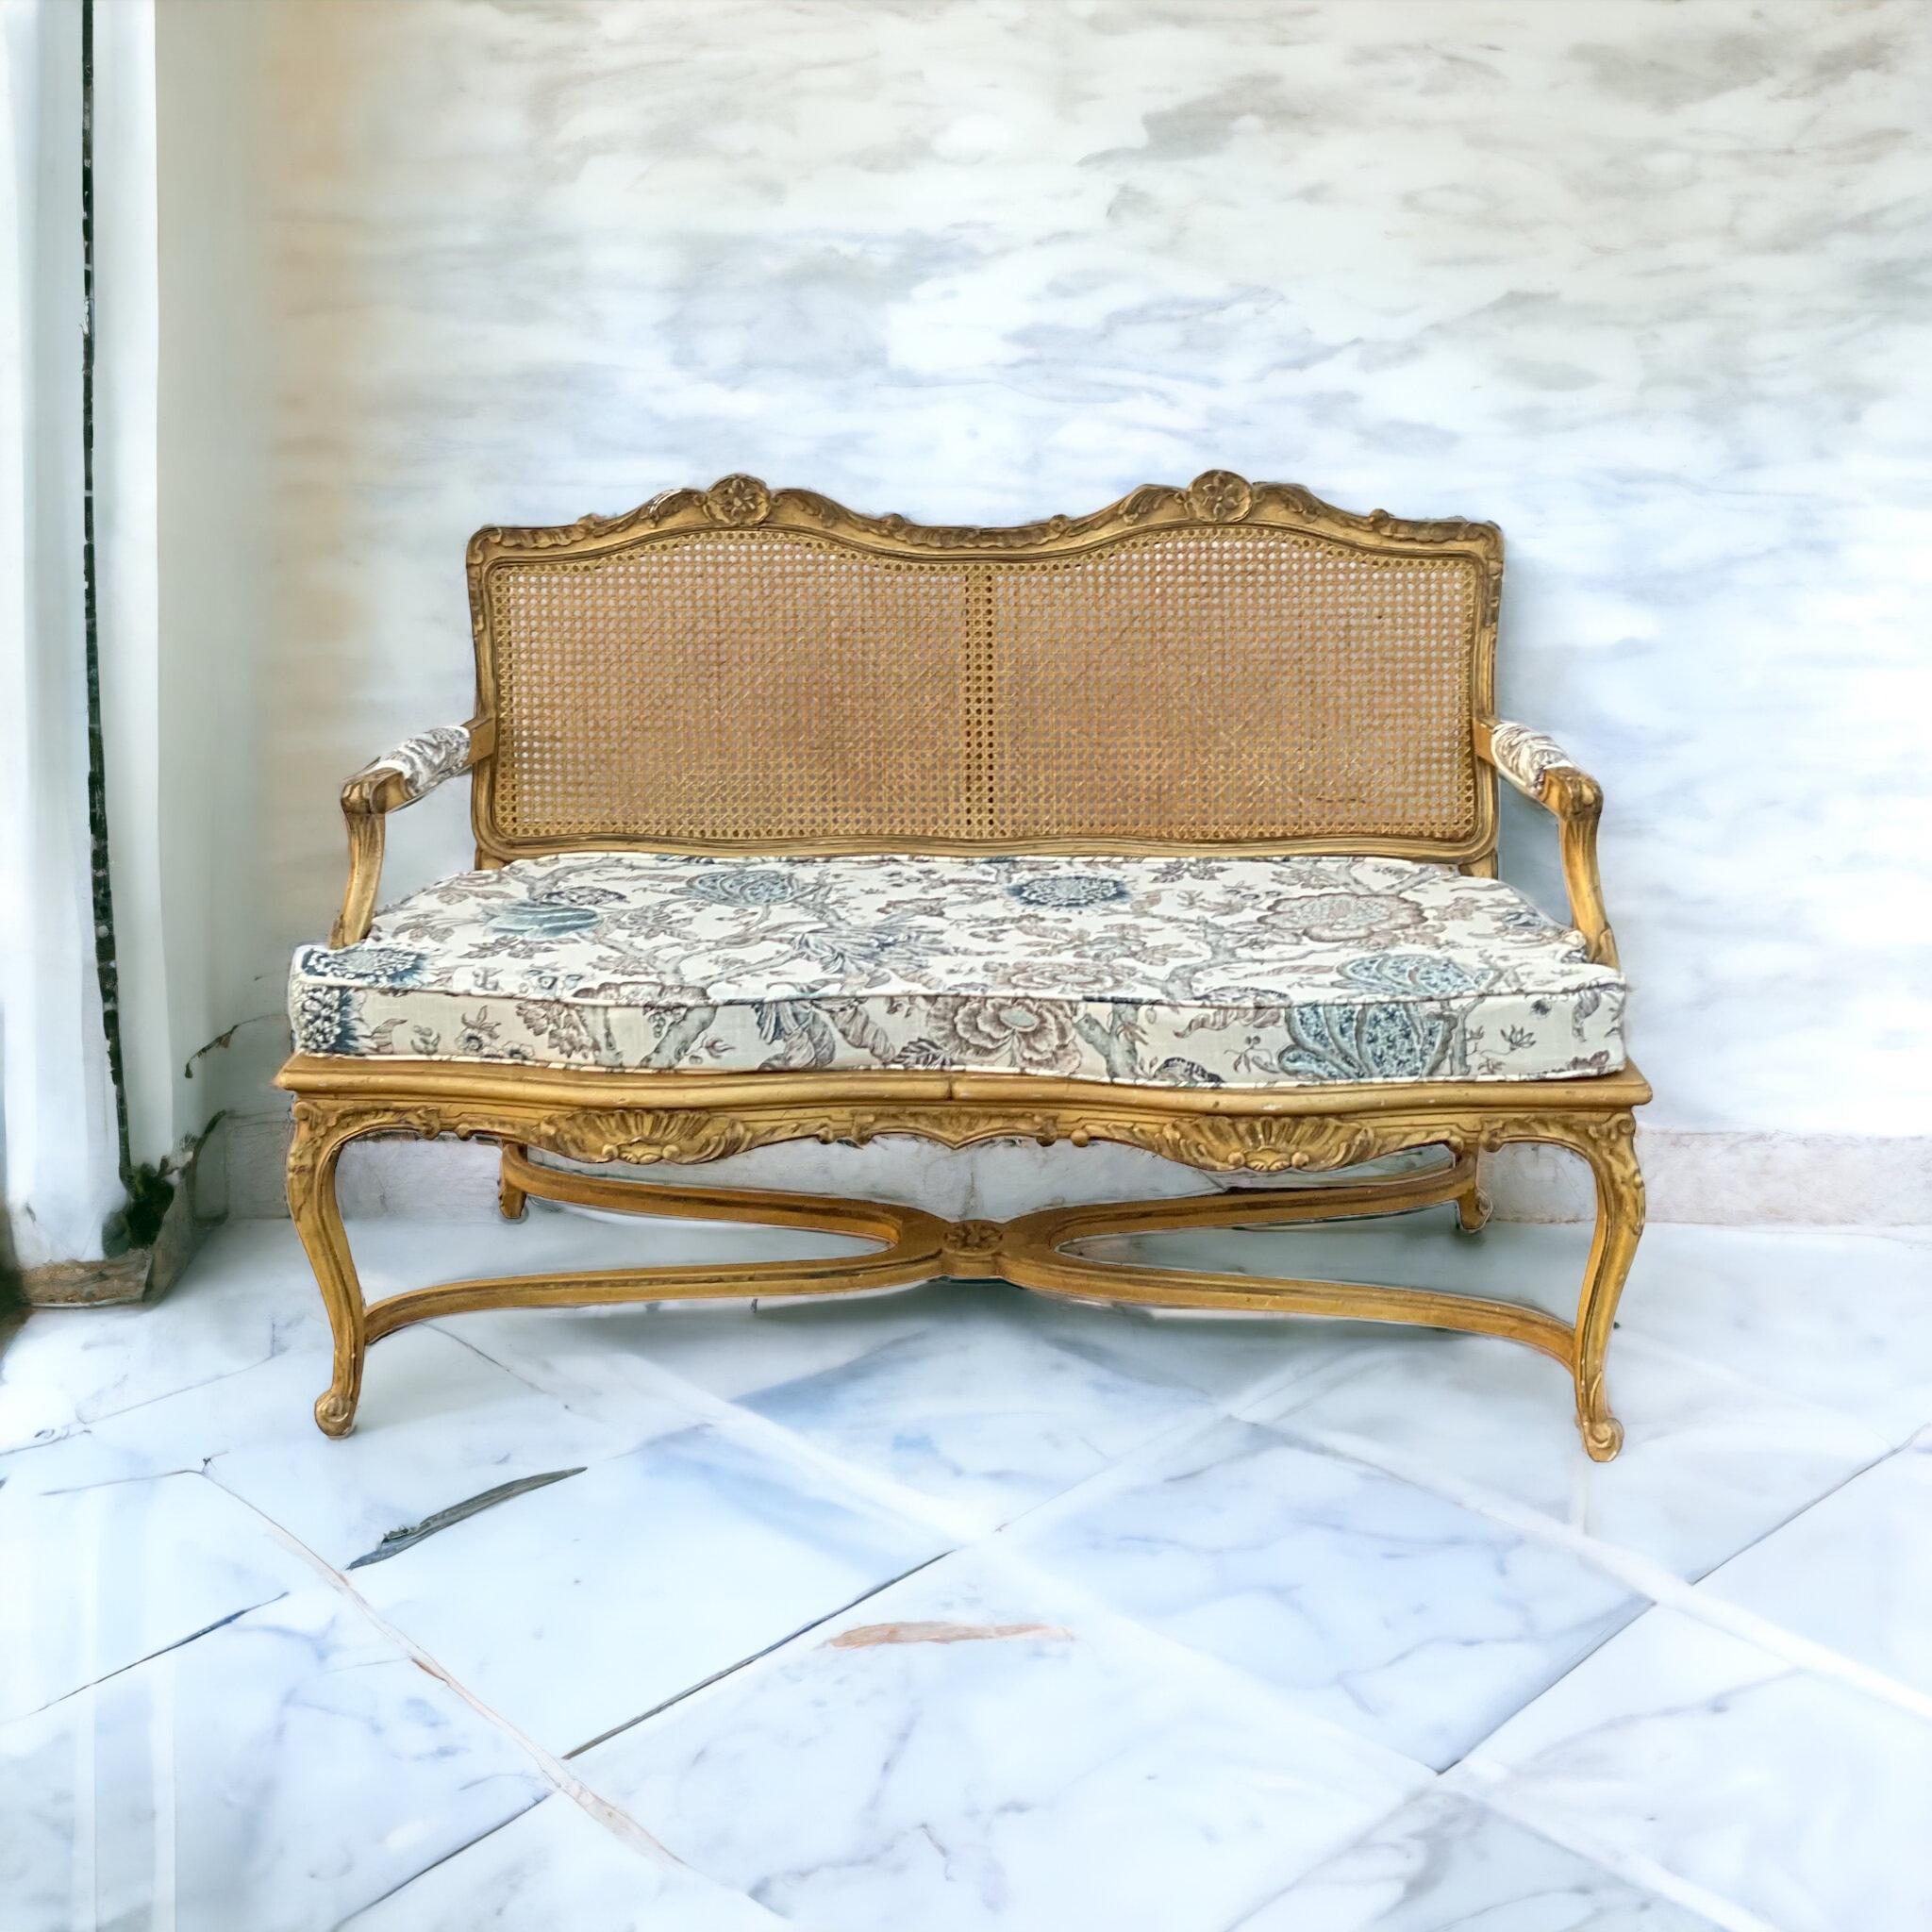 This is a mid-century French Louis XV style caned settee with an antique ivory finish. The linen cushion is new and in neutral florals.